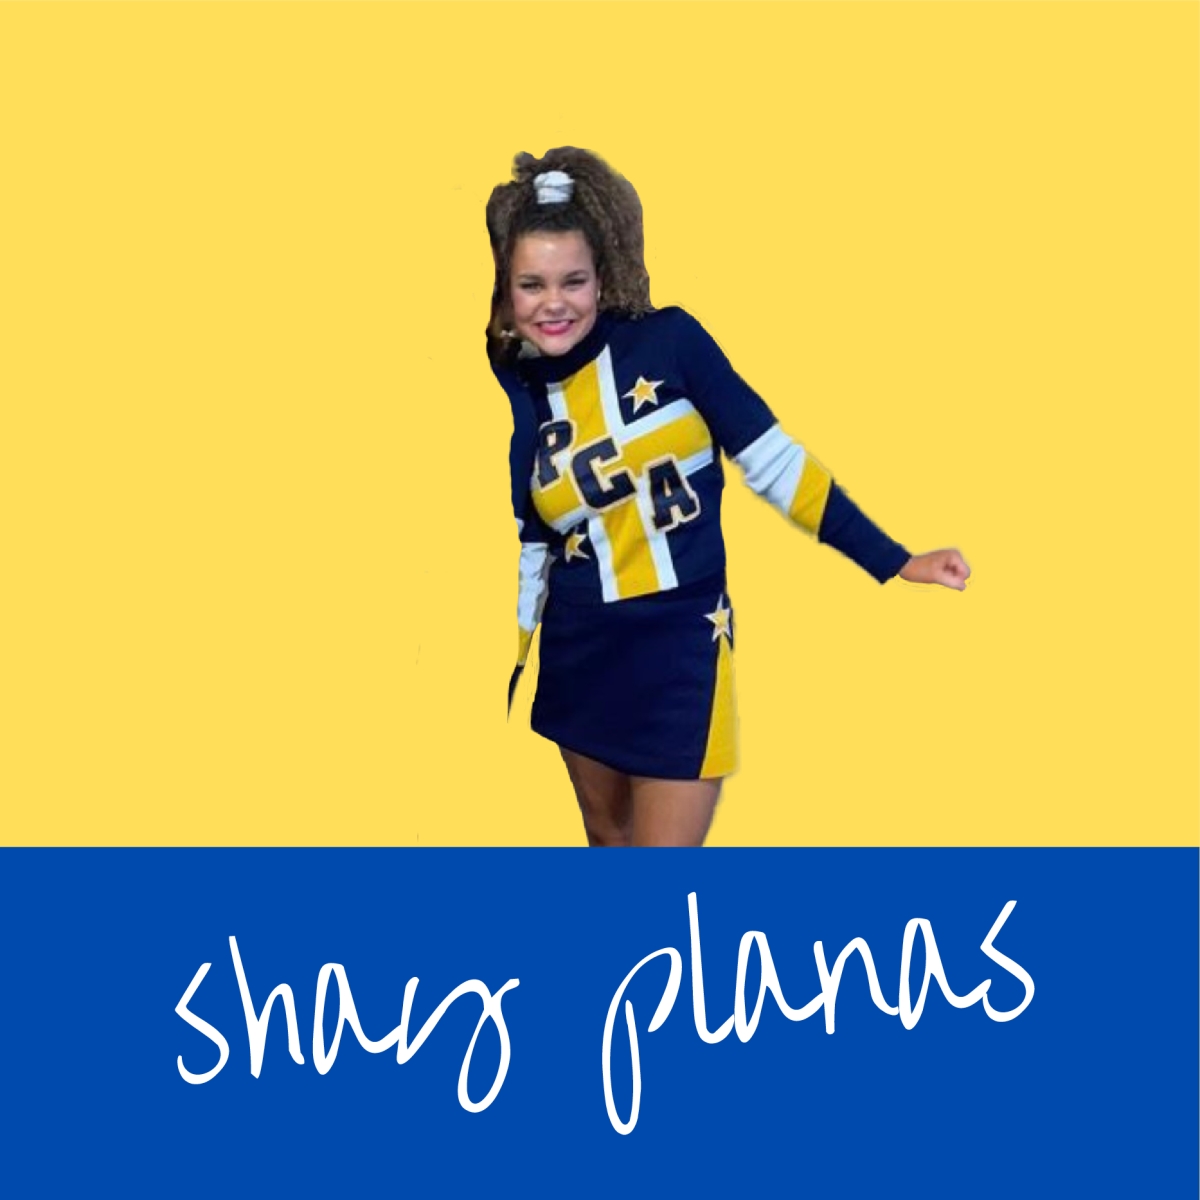 Meet+the+Player+Comp+Cheer-+Shayley+Planas